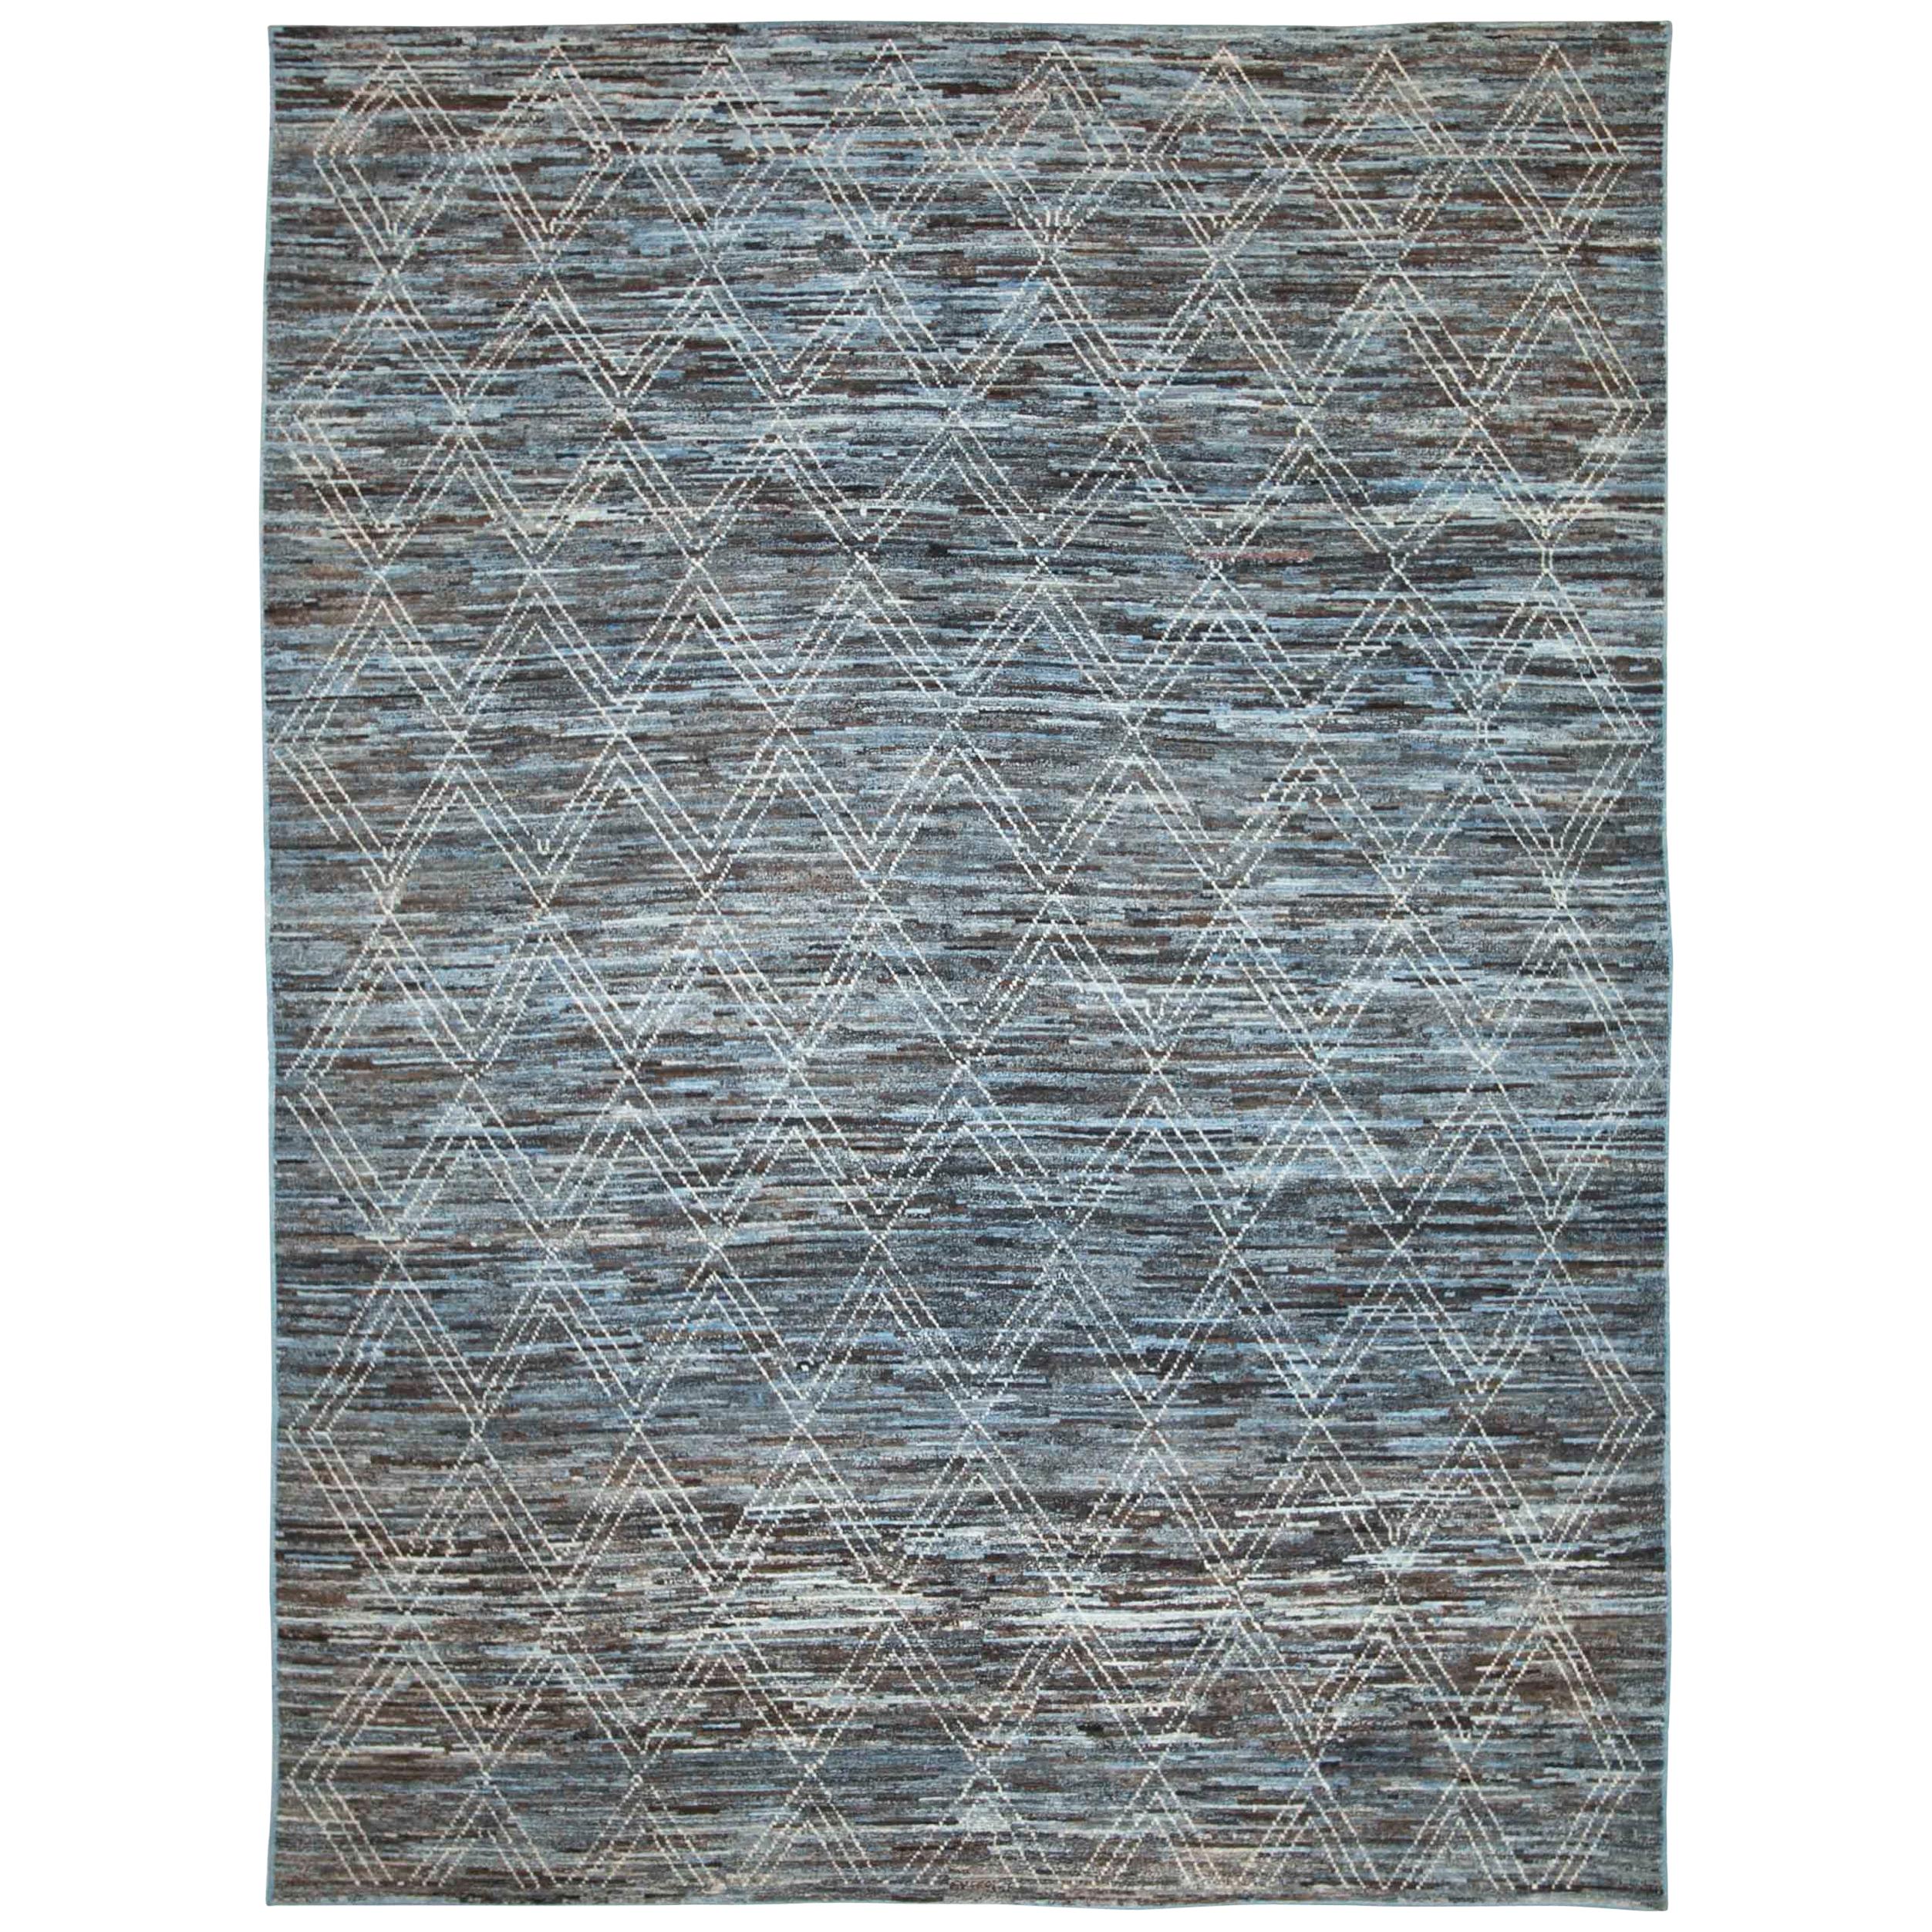 Modern Afghan Moroccan Style Rug with Ivory Diamonds Over Blue and Brown Field